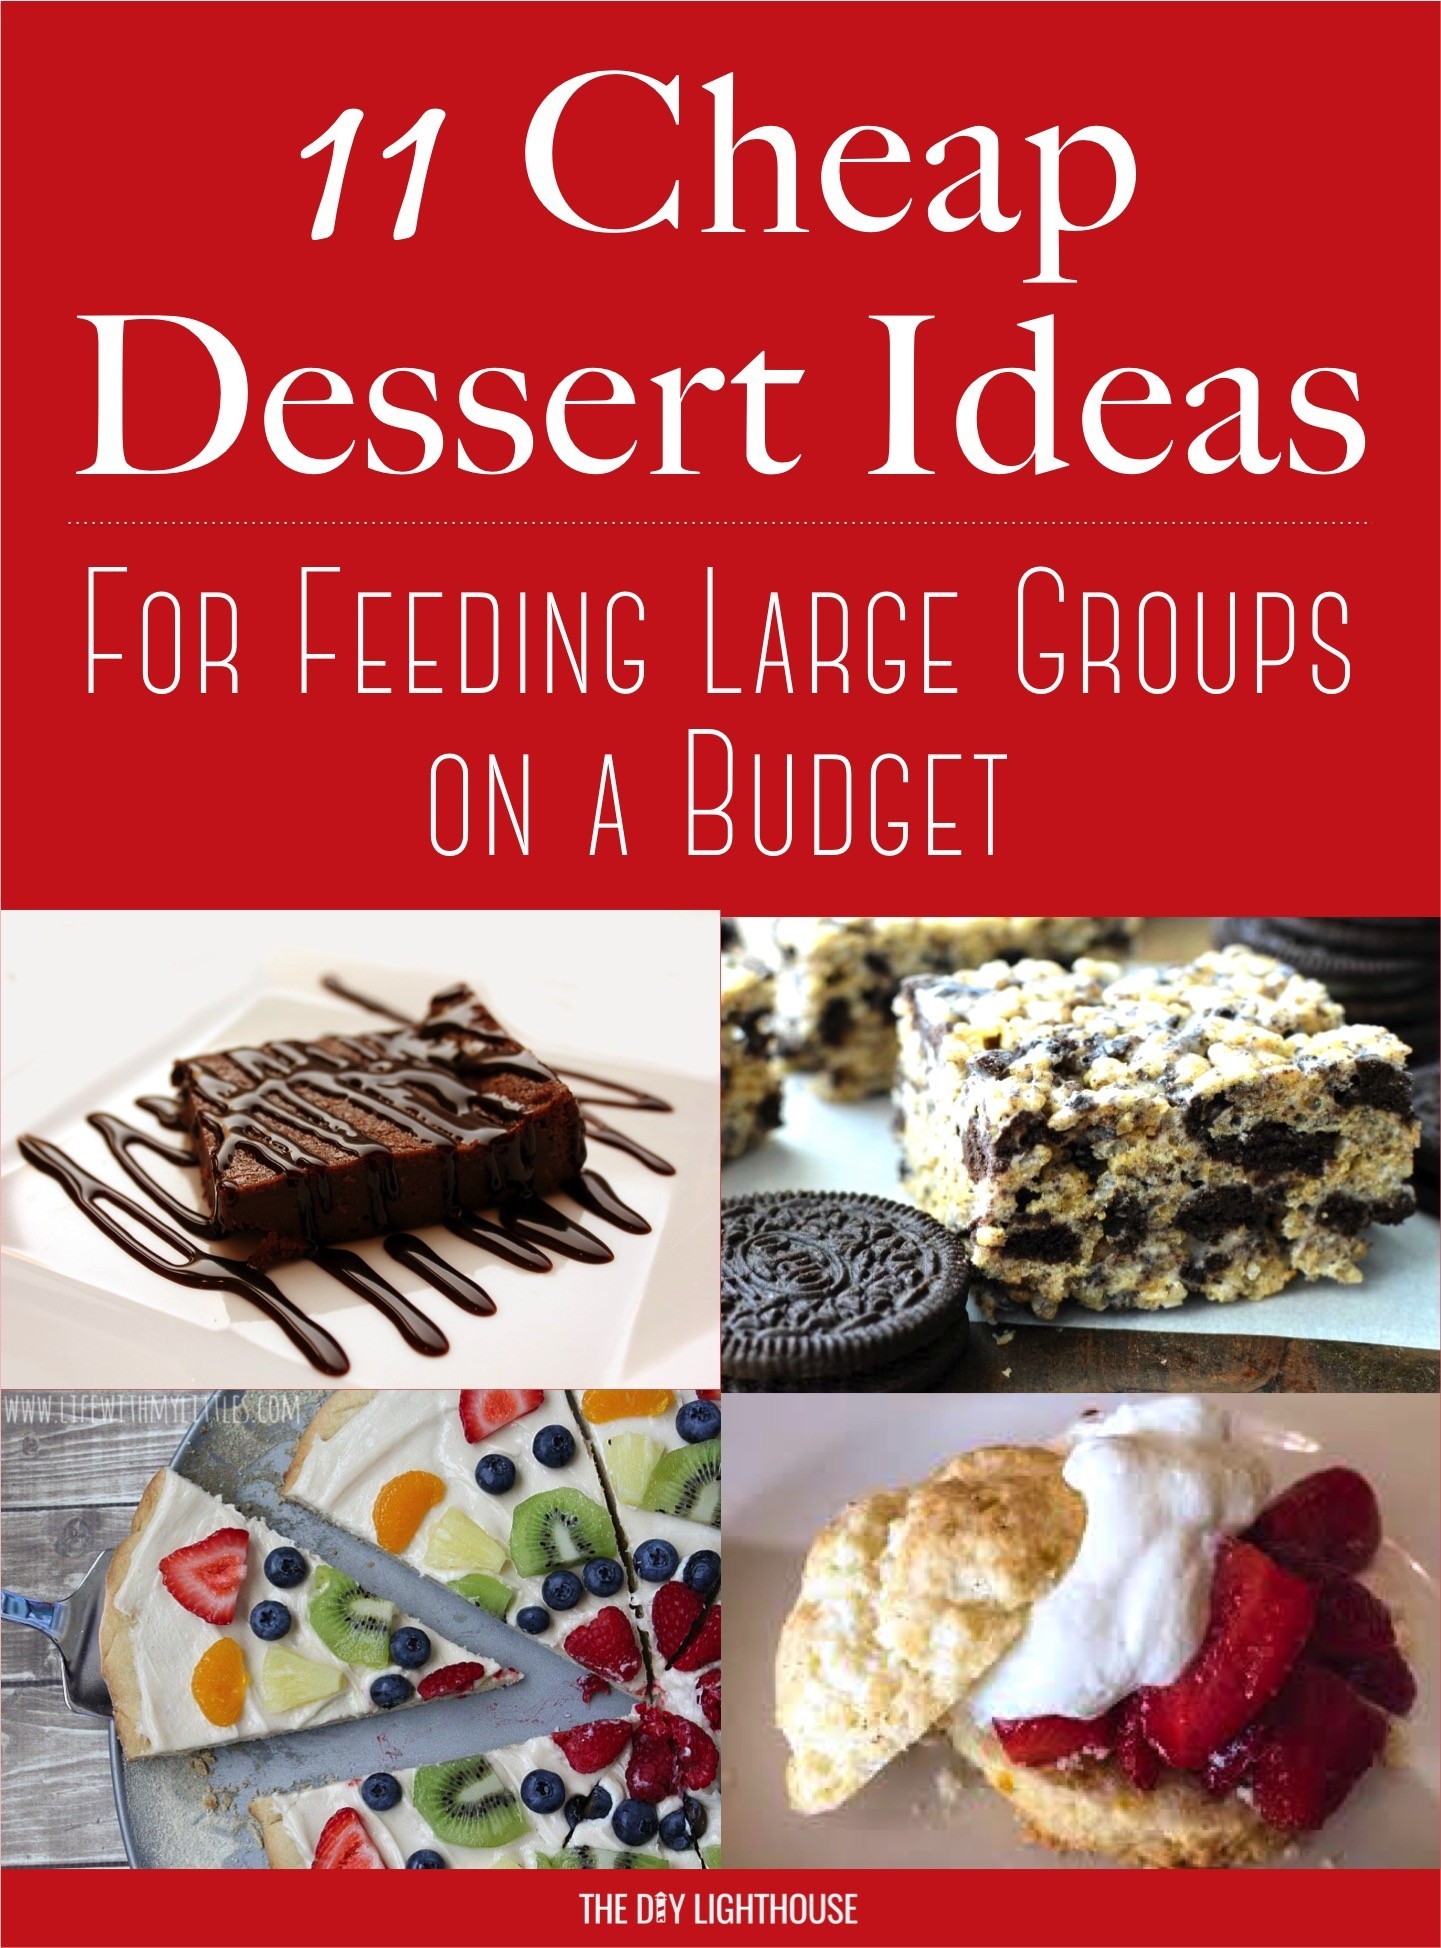 11 Cheap Dessert Ideas for Feeding a Large Group on a Budget | How to feed a lot of people if you are on a tight budget | Tips and tricks for cheap desserts for a crowd | party ideas and inspiration